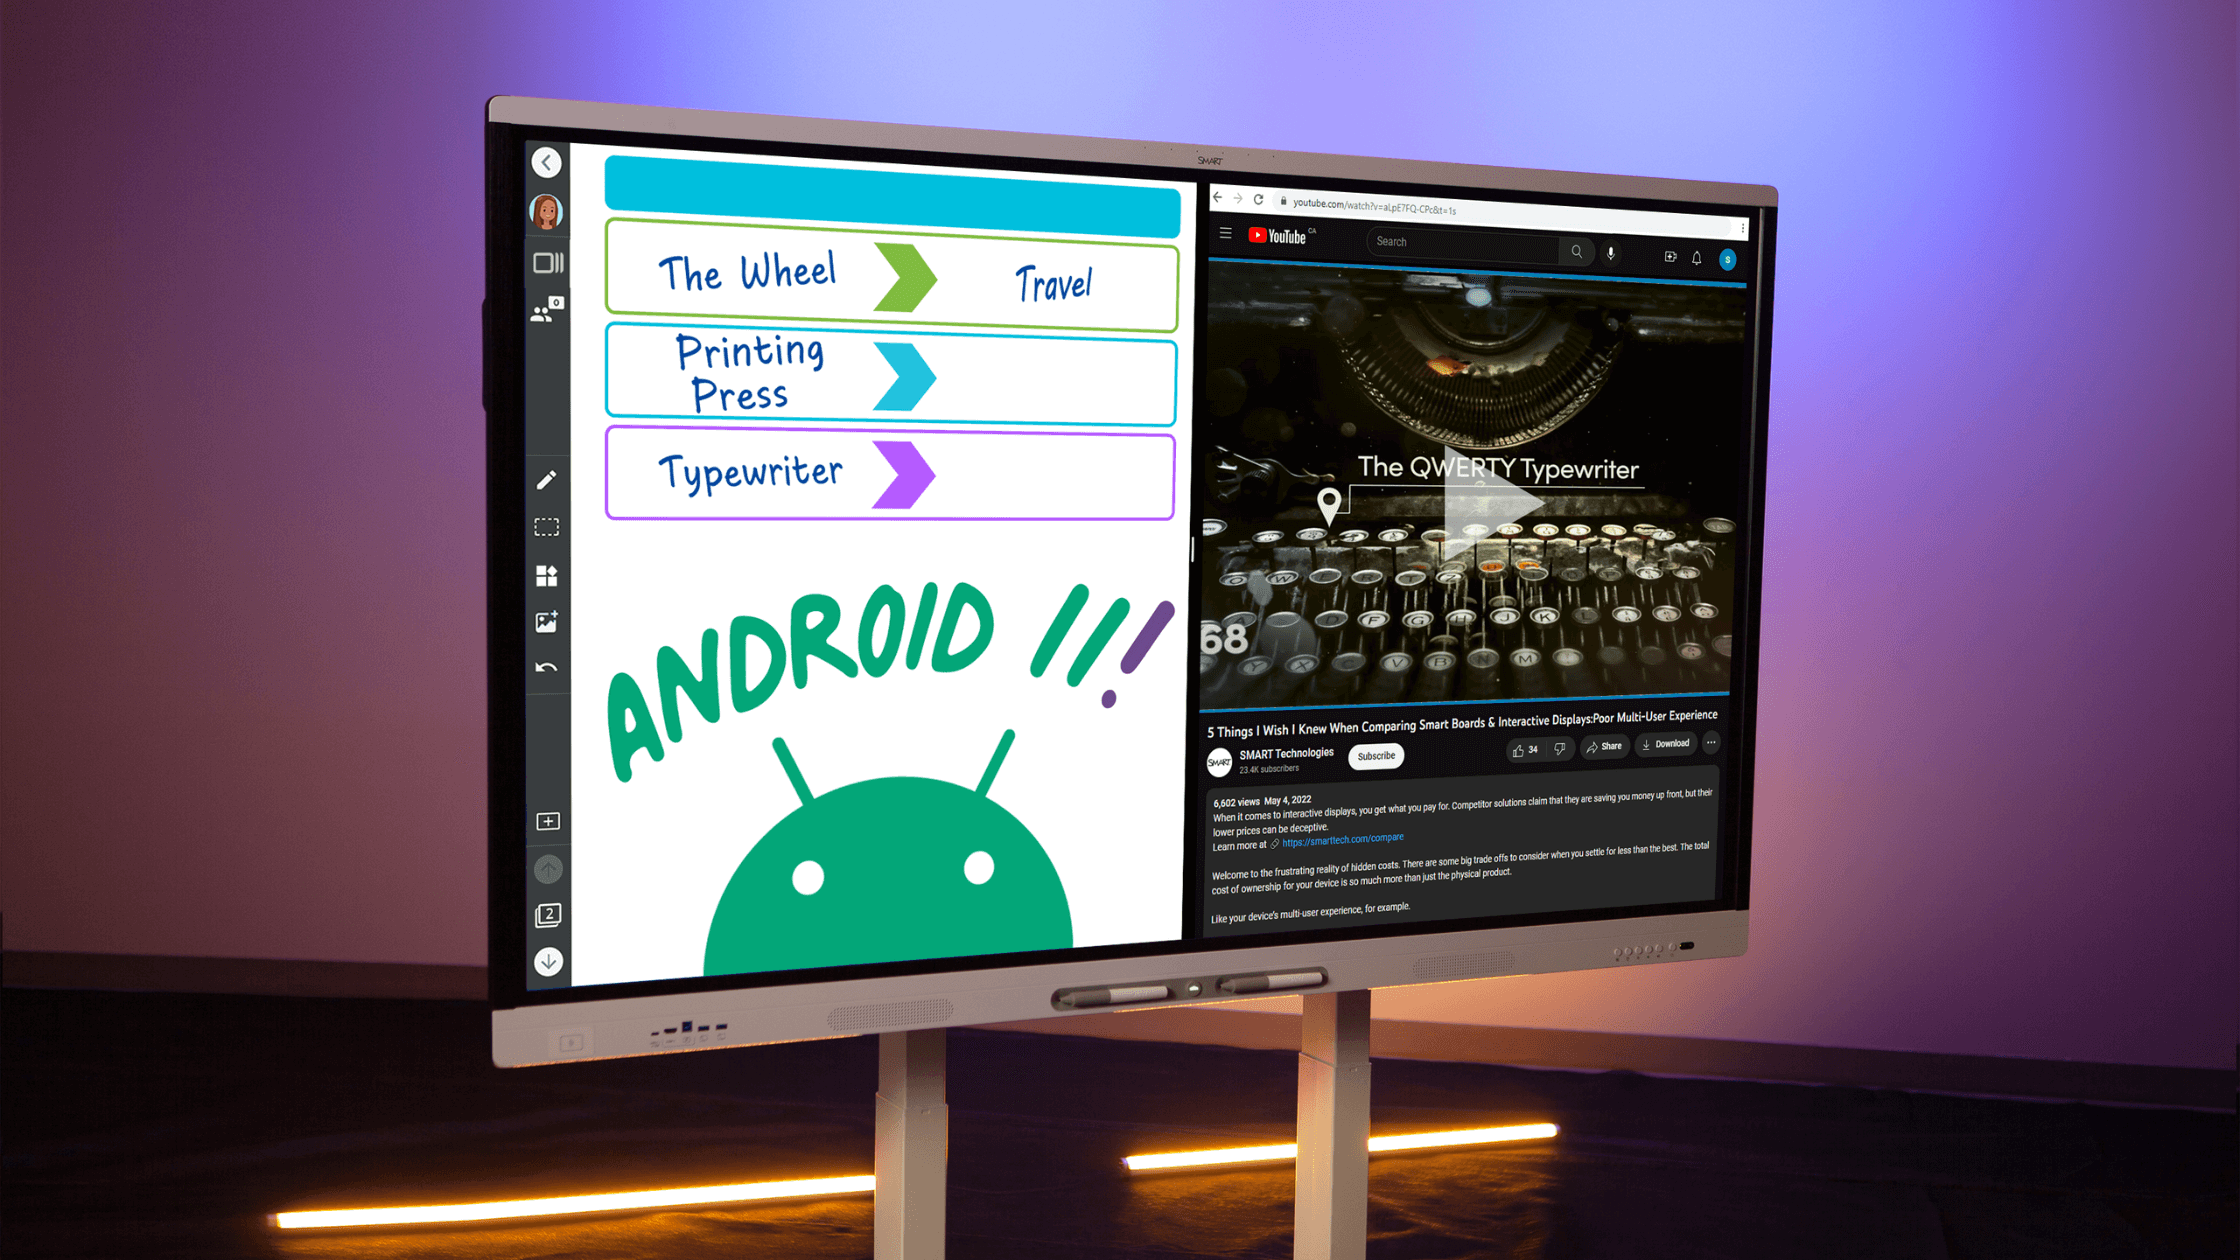 A SMART Board featuring split screen mode with a browser open on the right and a whiteboard on the left.